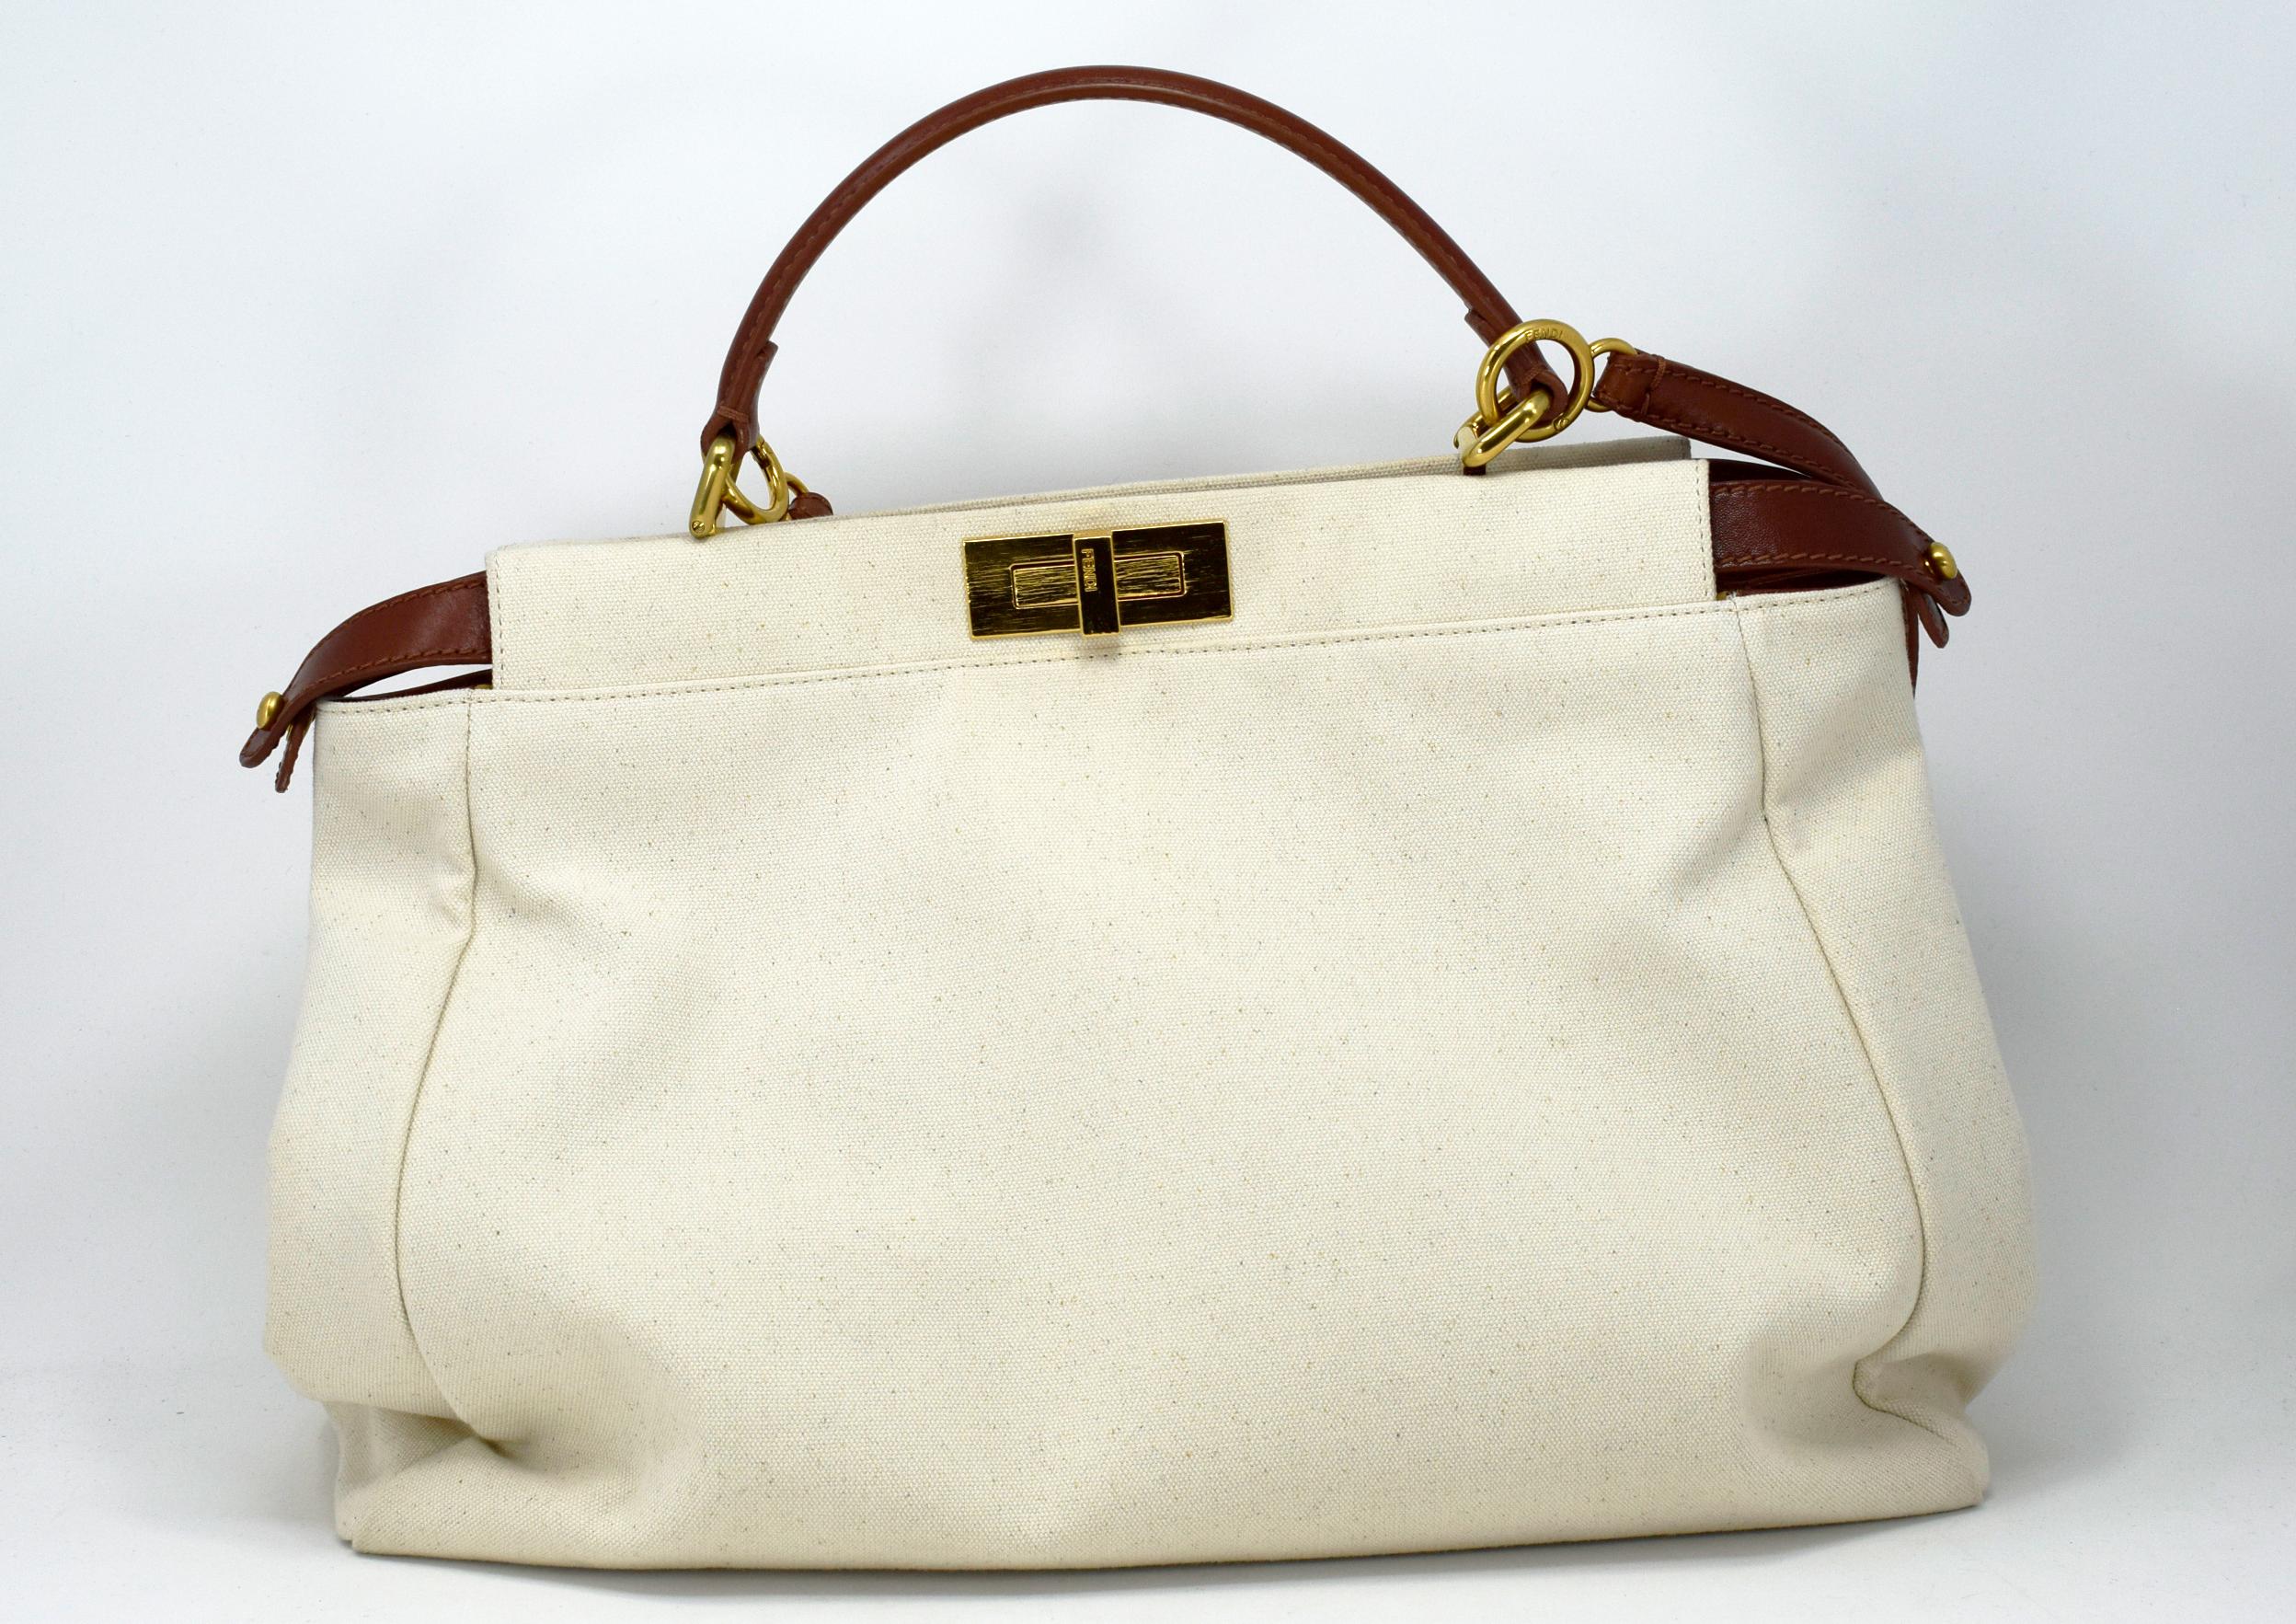 Fendi Peekaboo Handbag Canvas Large is one of Fendi best known designs exuding a luxurious yet minimalist appearance. Crafted in off white canvas, this versatile and stylish satchel features a flat brown leather top handle, protective base studs and